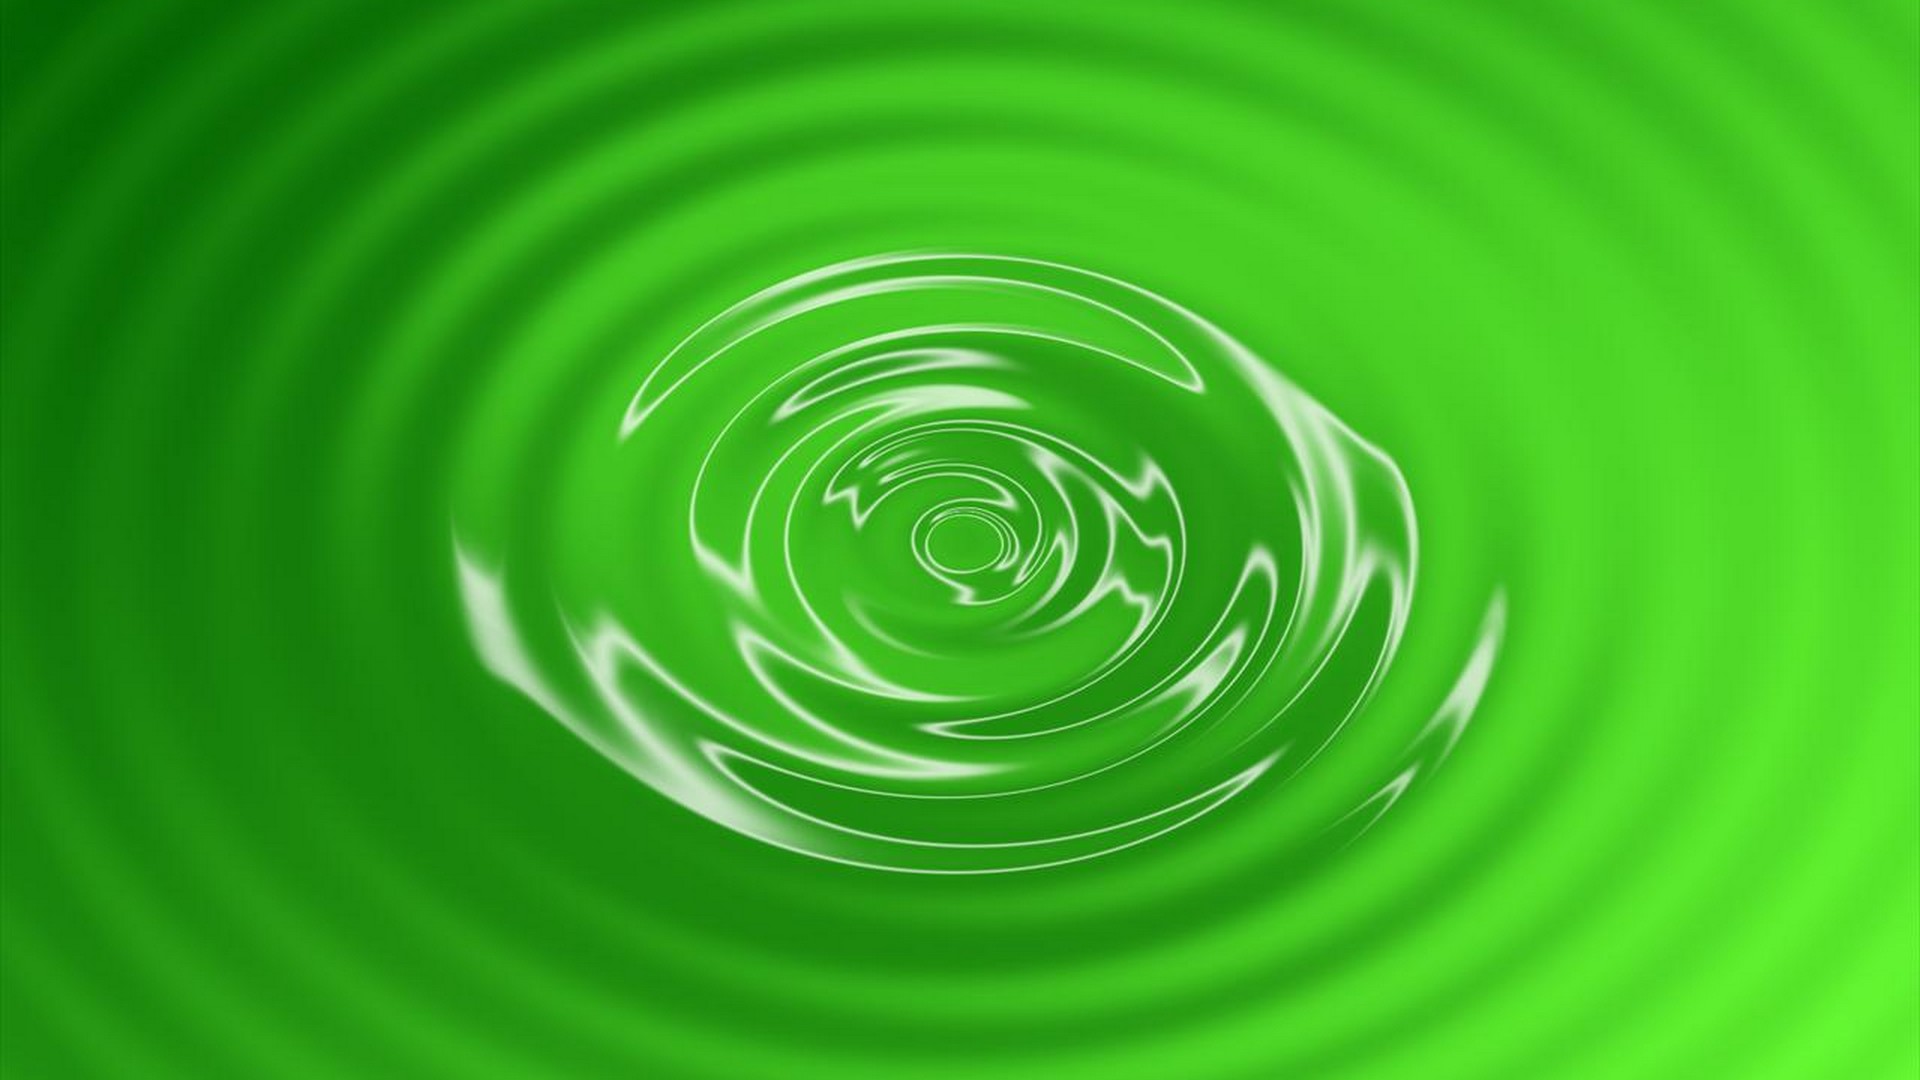 Green HD Backgrounds With Resolution 1920X1080 pixel. You can make this wallpaper for your Desktop Computer Backgrounds, Mac Wallpapers, Android Lock screen or iPhone Screensavers